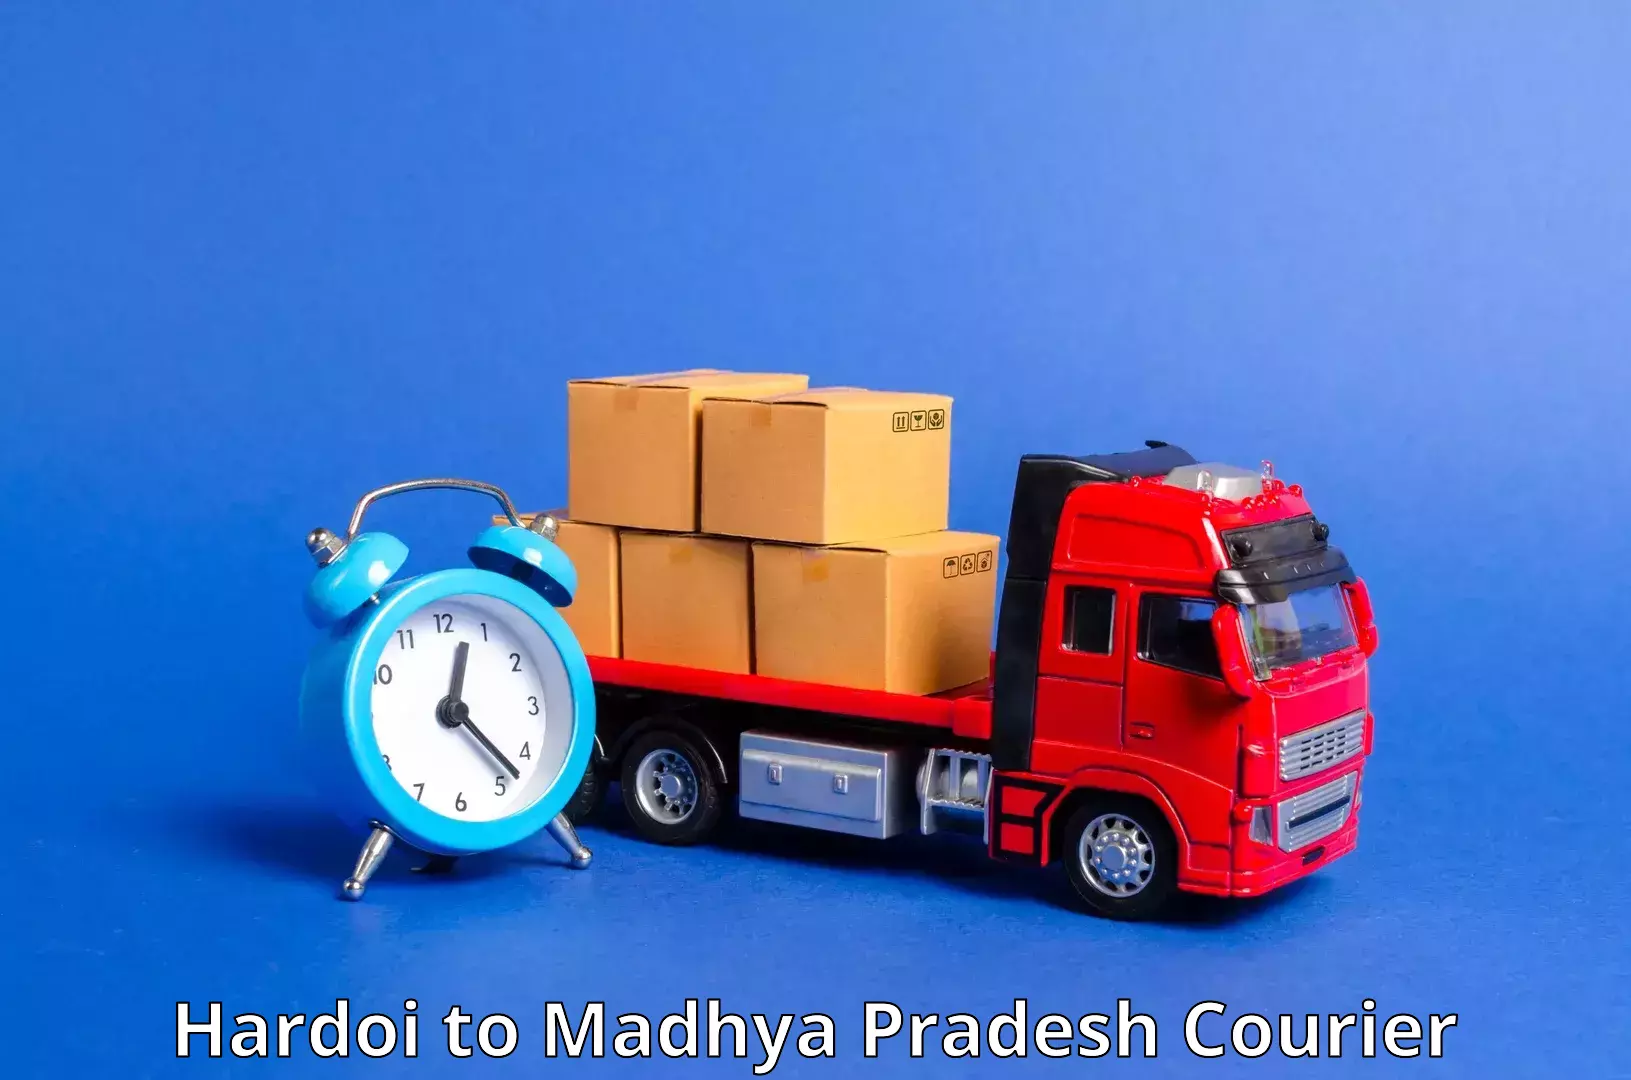 Round-the-clock parcel delivery Hardoi to Thikri